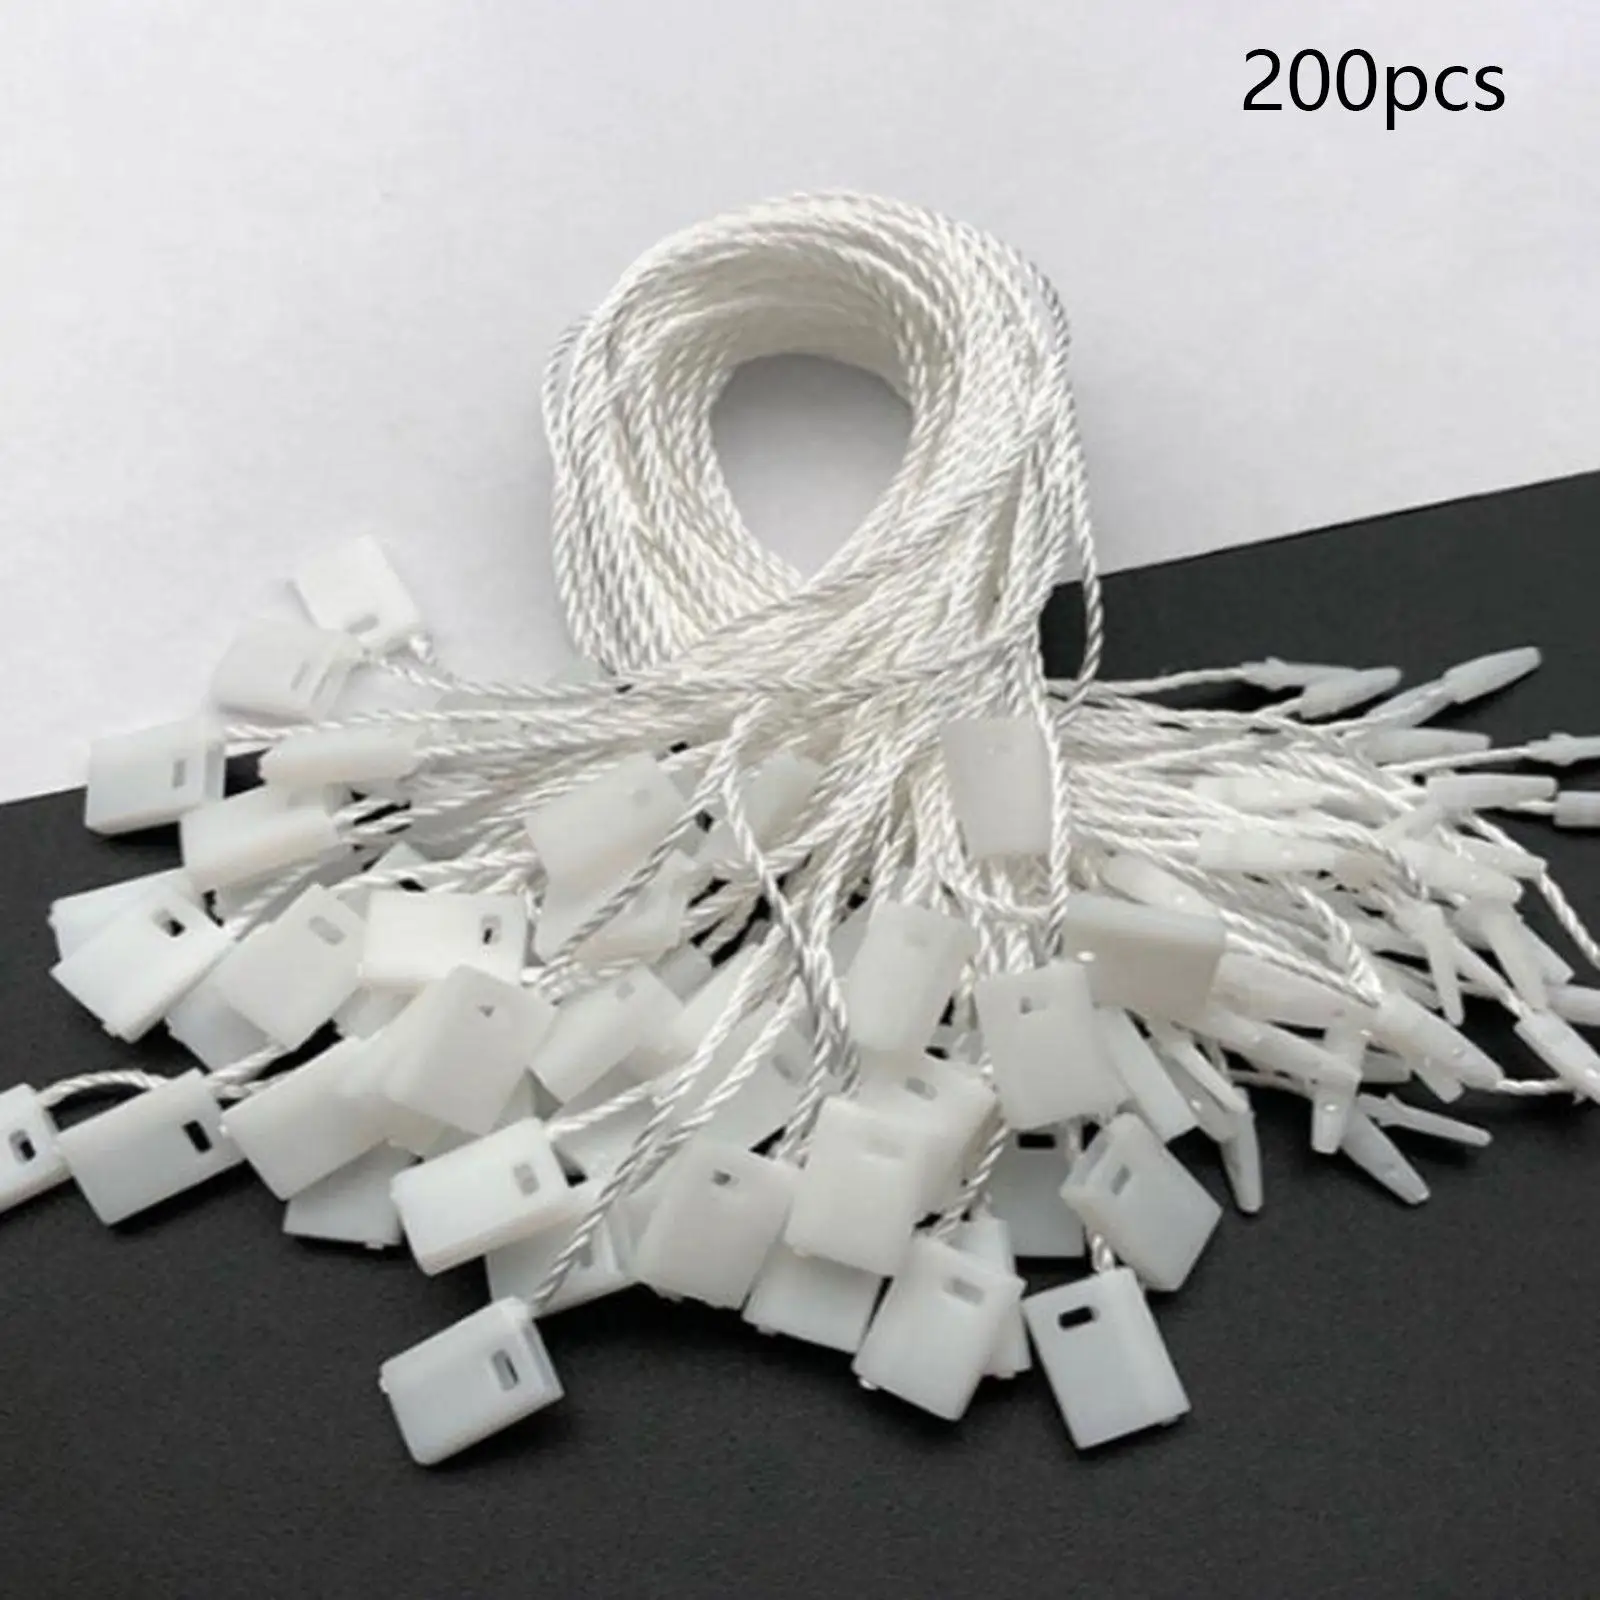 200Pcs Hang Tag Strings Craft Making Durable Fastener Hook Ties Clothing Tags Strings for Retail Luggage Garment Purse Gift Tags